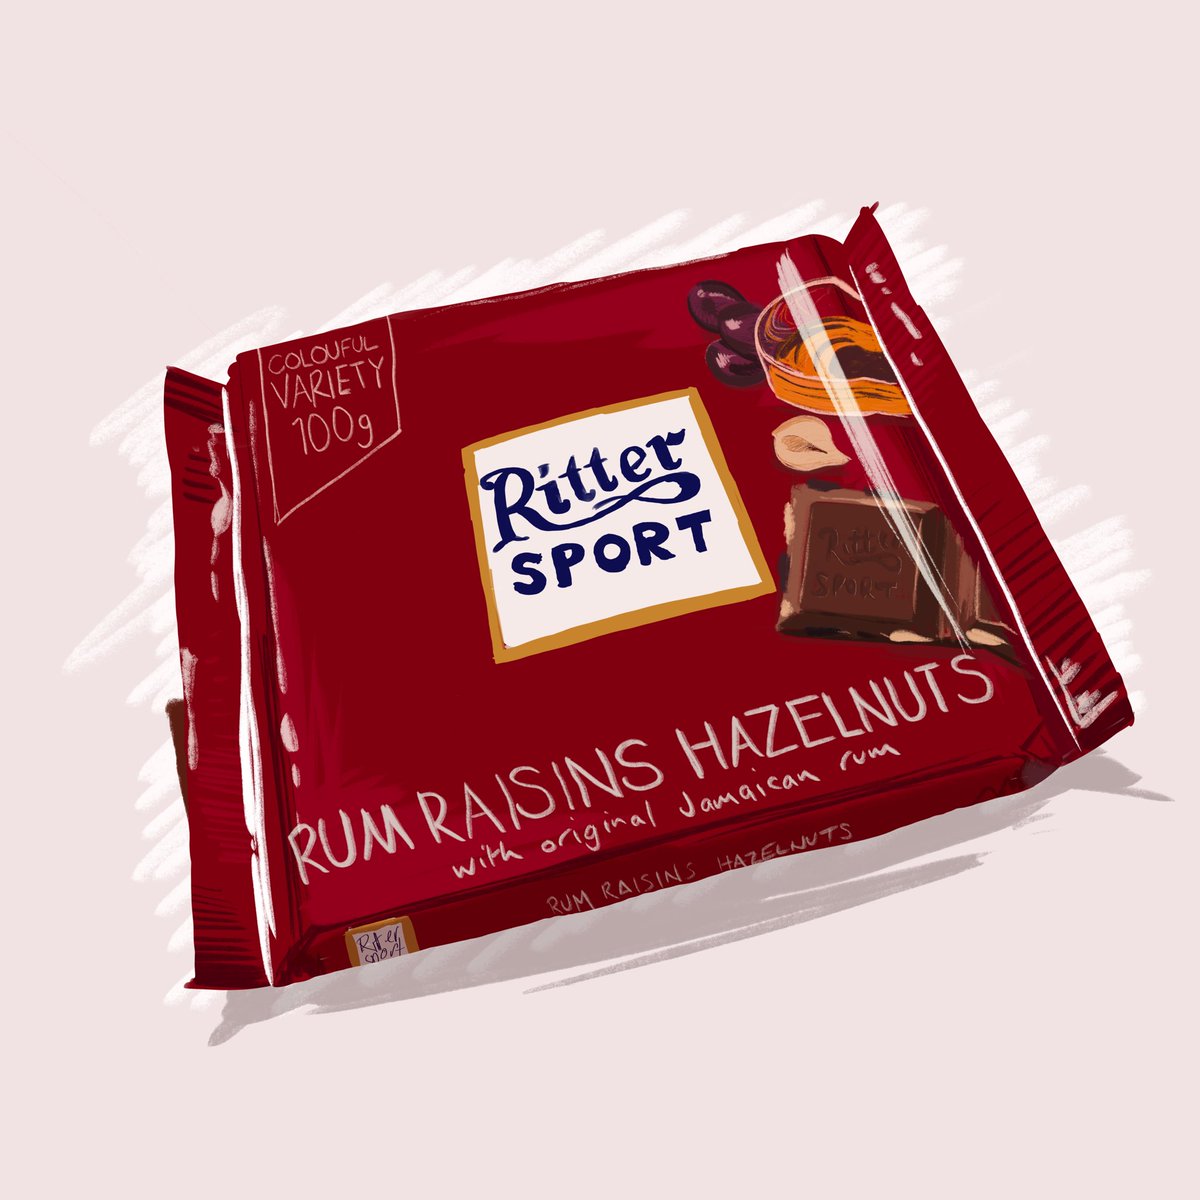 Rum and Raisin (or Rum Raisins Hazelnuts, officially) seems to be a fan favourite  @ritter_sport and I can see why. I had one the other day and it knocked my block off!  #rittertwitter  #trevschoc  #rittersport  @rittersportuk